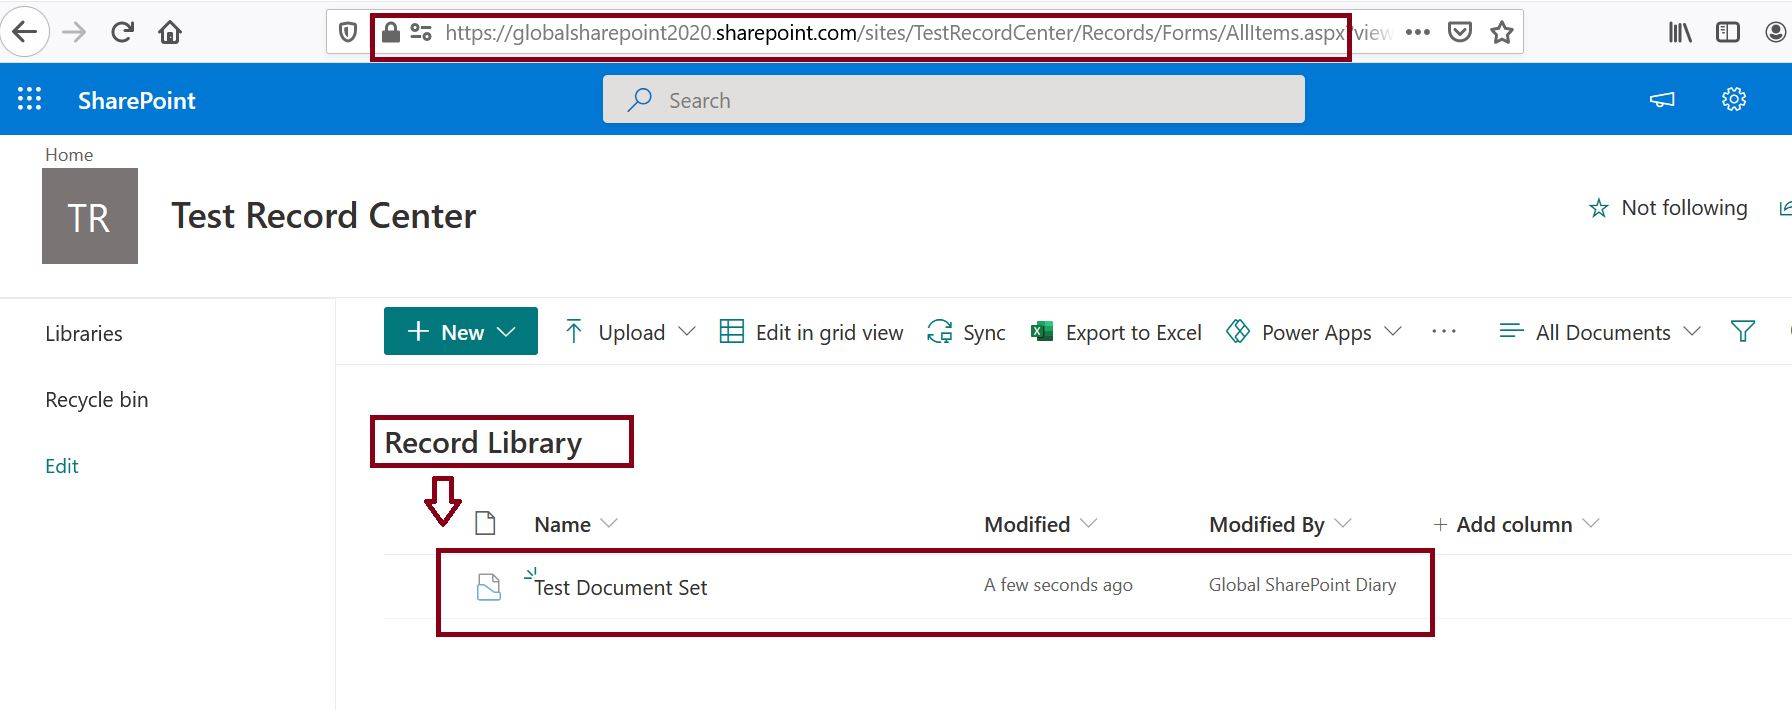 Record center in SharePoint Online - Document has been moved to the record library automatically using the content organizer rules